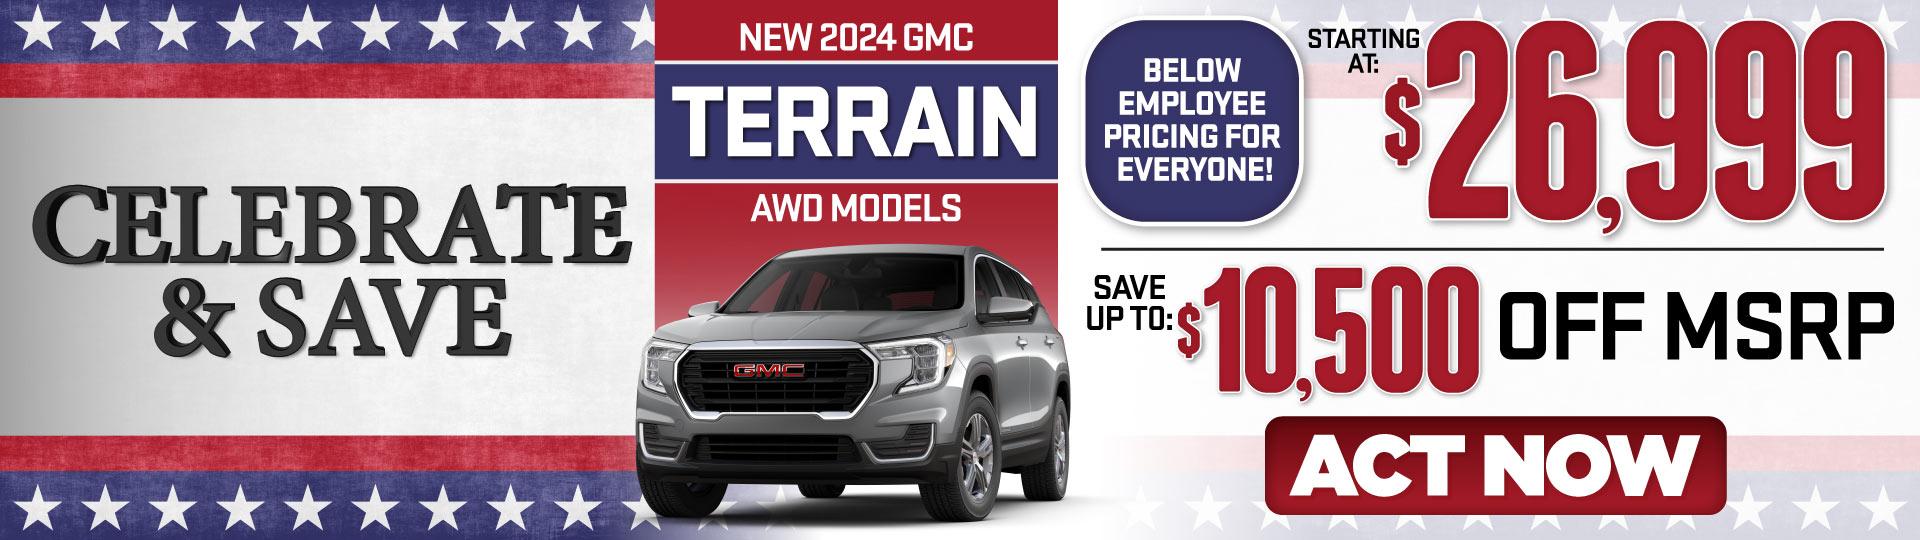 NEw 2024 GMC Terrain - Below Employee Pricing For Everyone! | Starting At: $26,999 | Save Up To: $10,500 Off MSRP — Act Now